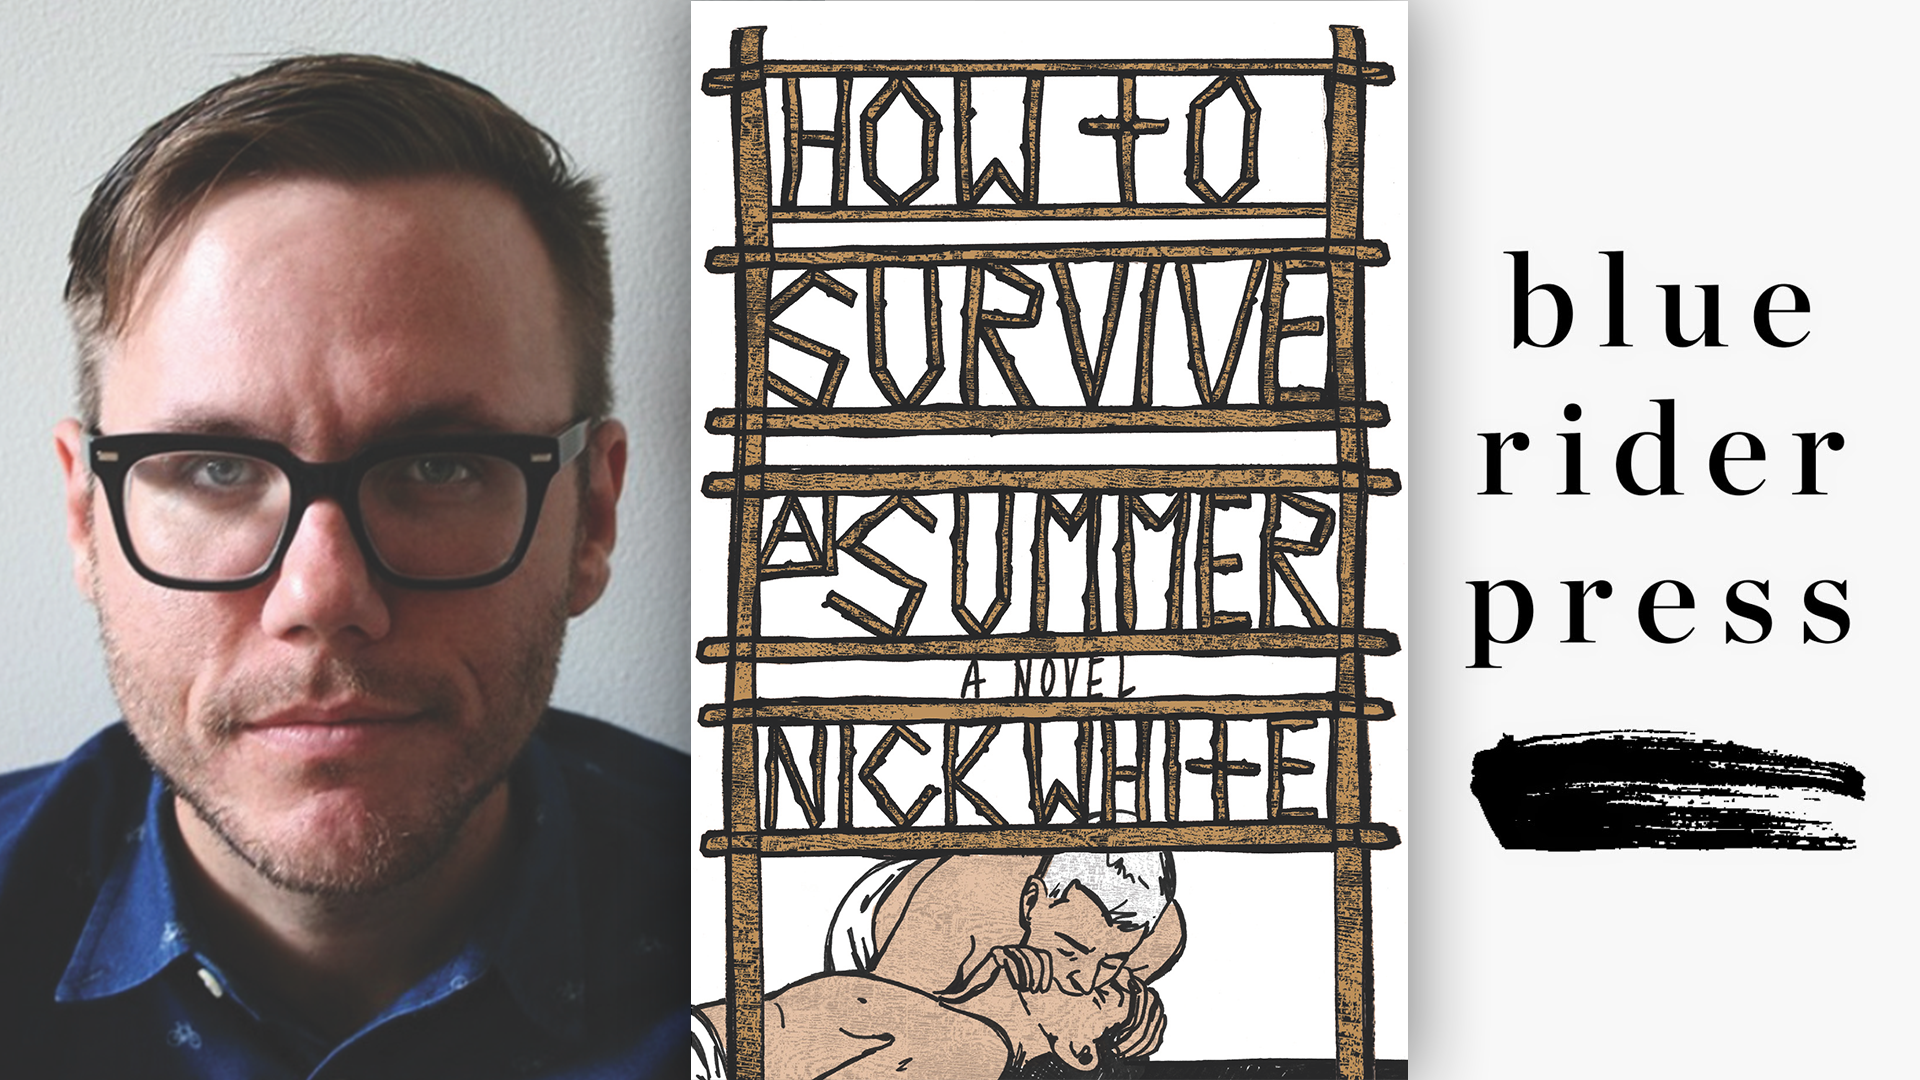 Nick White, the cover of HOW TO SURVIVE A SUMMER and the blue rider press logo; links to news story